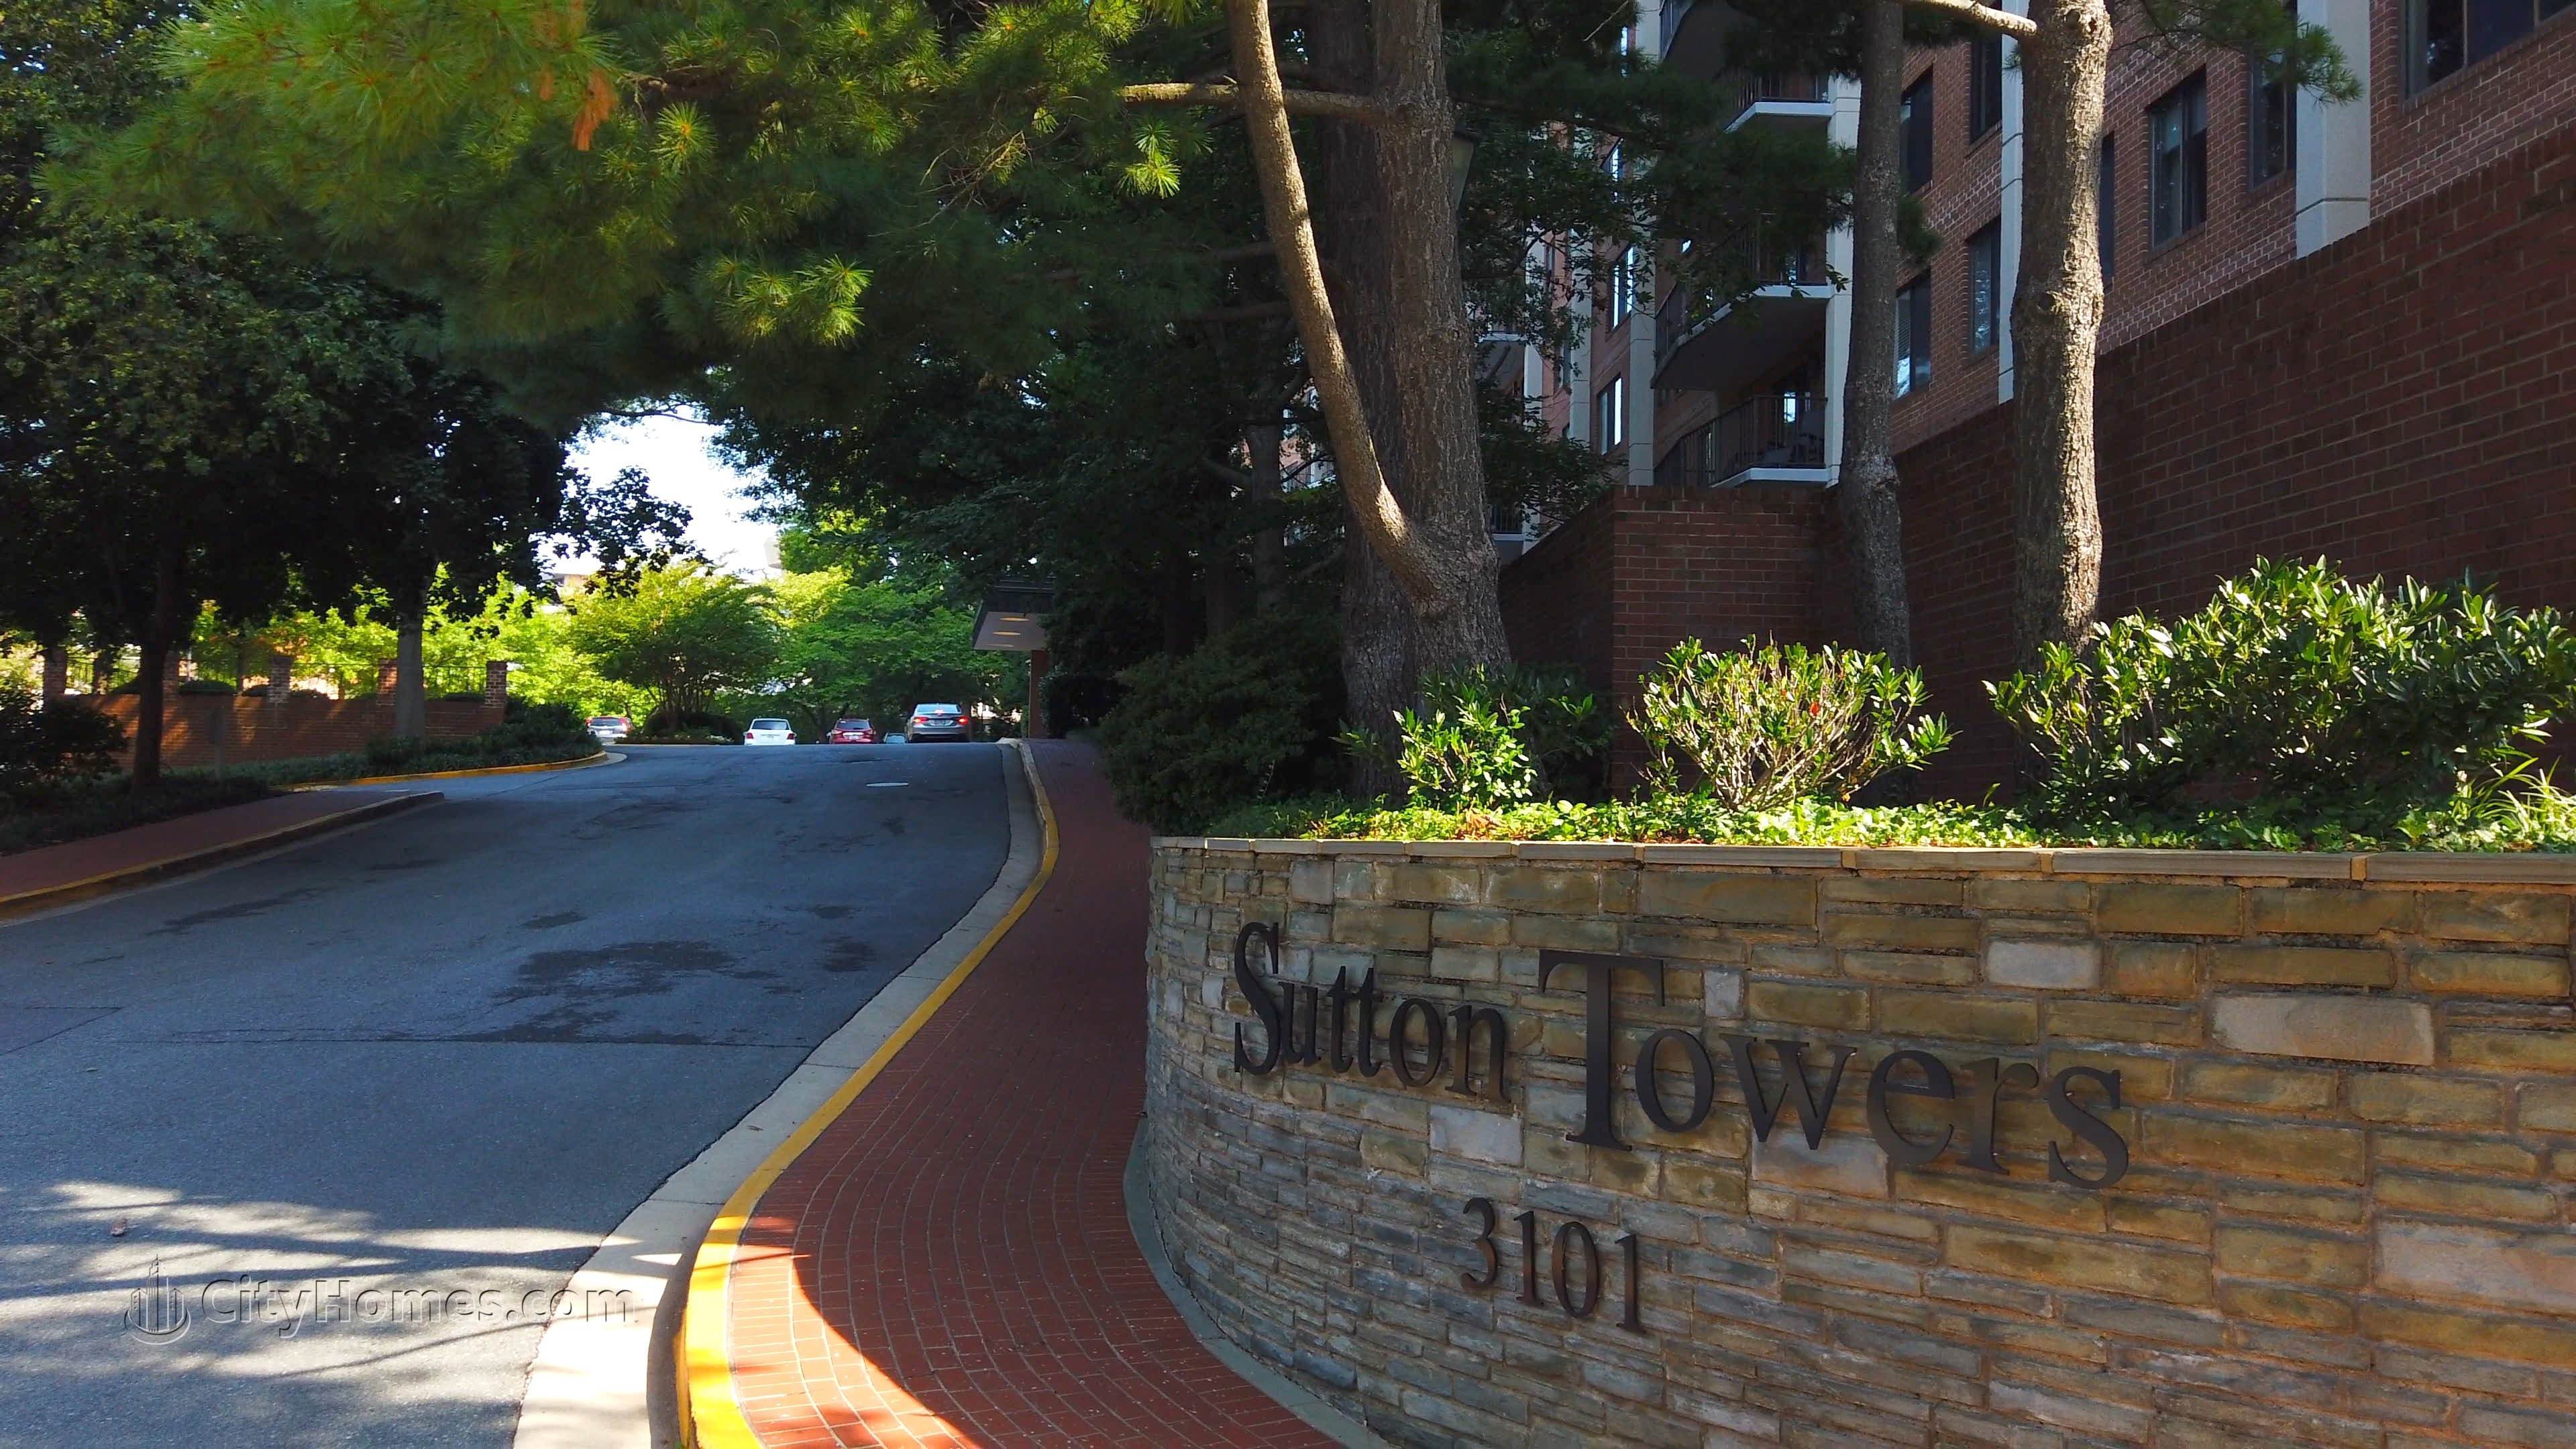 Sutton Towers建于 3101 New Mexico Ave NW, Wesley Heights, 华盛顿市, DC 20016